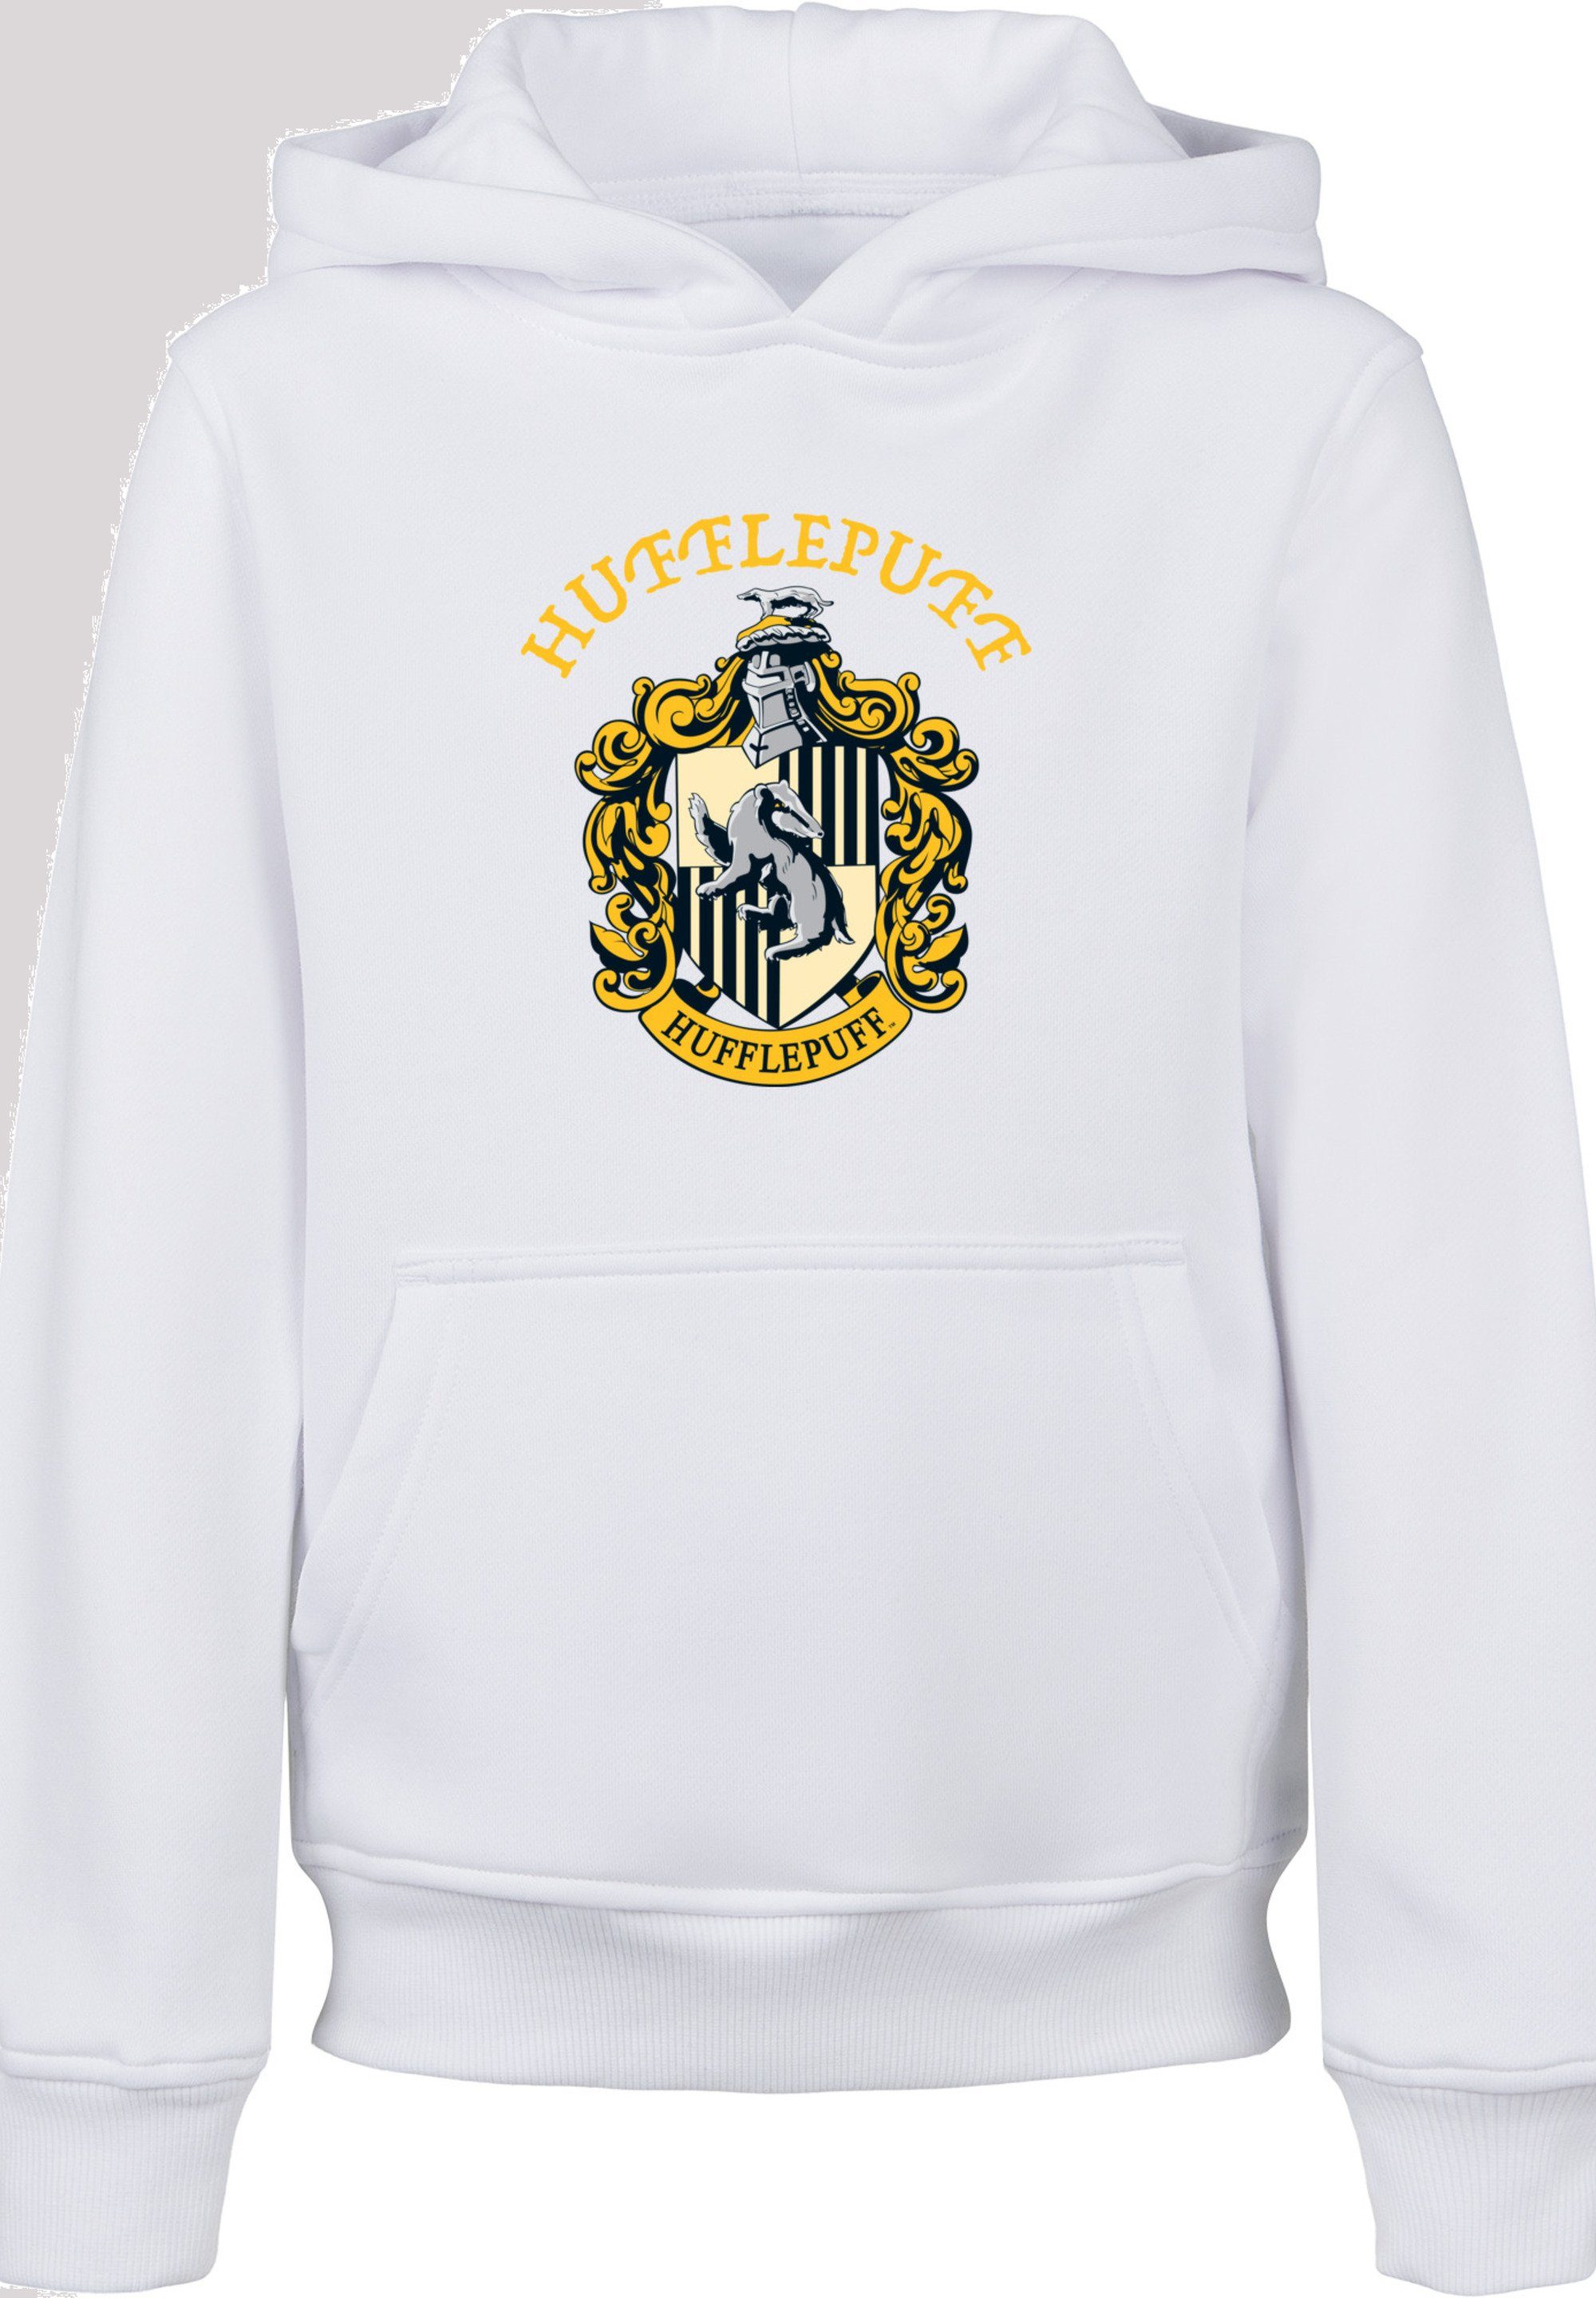 (1-tlg) with Crest white Potter Kinder Hoody Hufflepuff Hoodie Kids Harry Basic F4NT4STIC